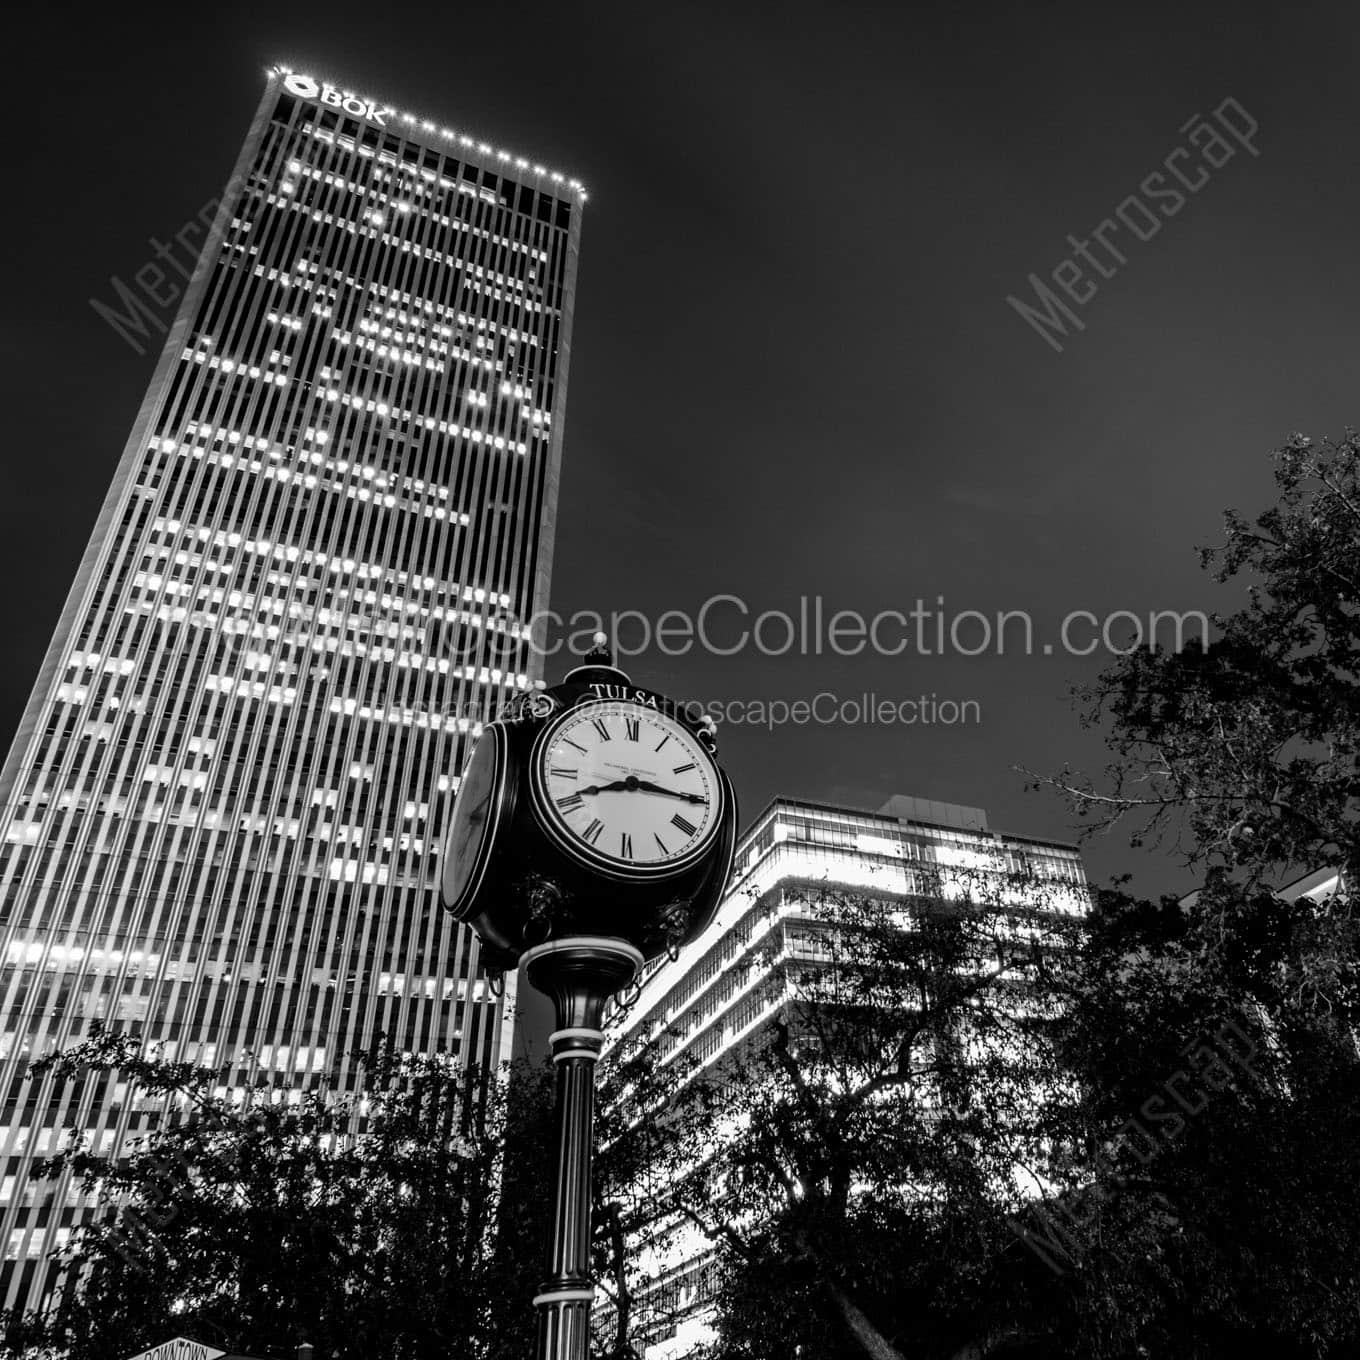 bank of oklahoma building at night Black & White Office Art